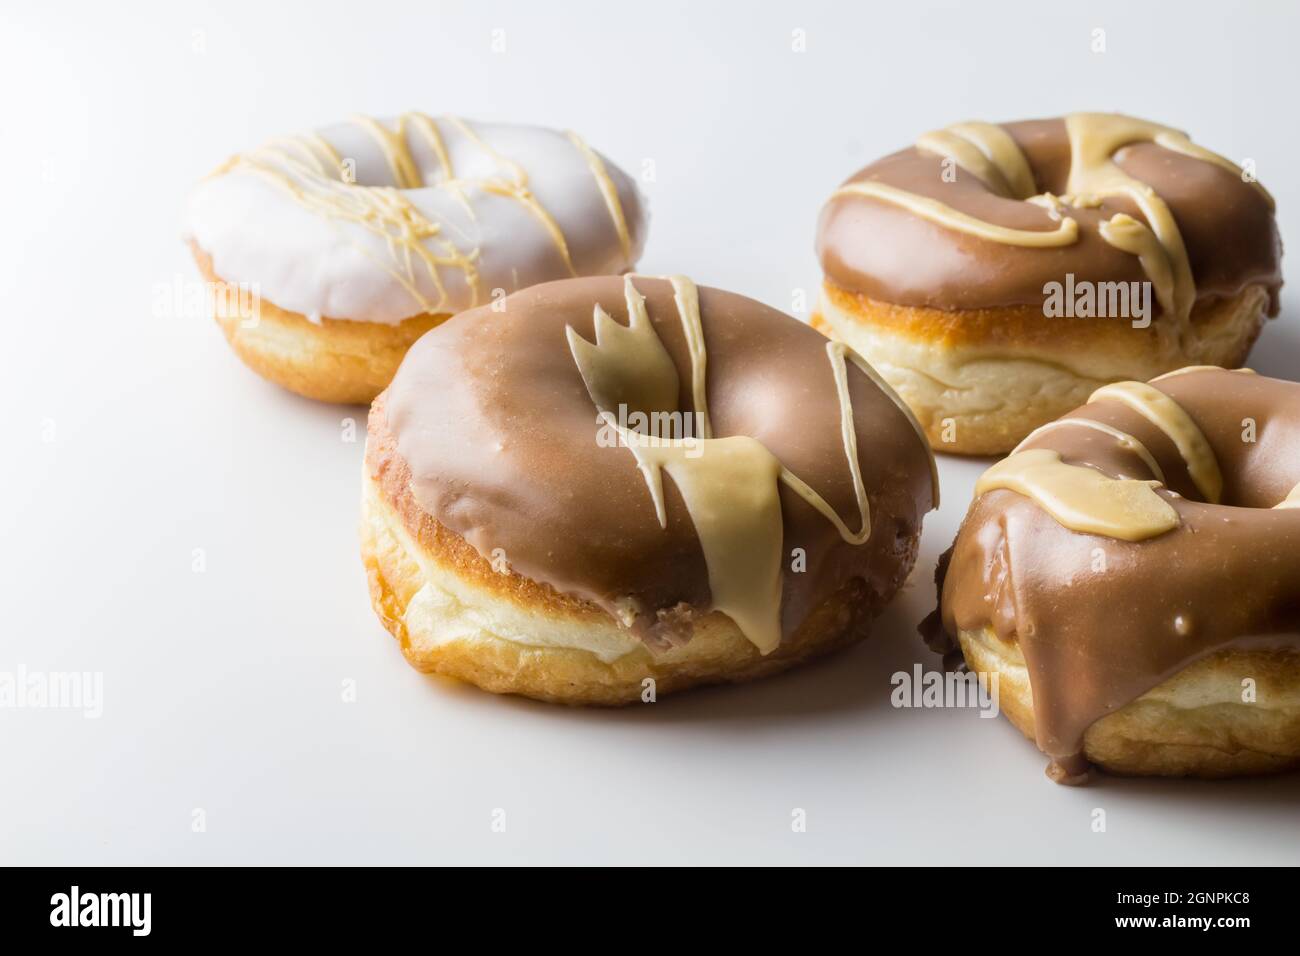 Glazed donuts with chocolate, vanilla and caramel frosting - rustic style delicious doughnut background with copy space Stock Photo